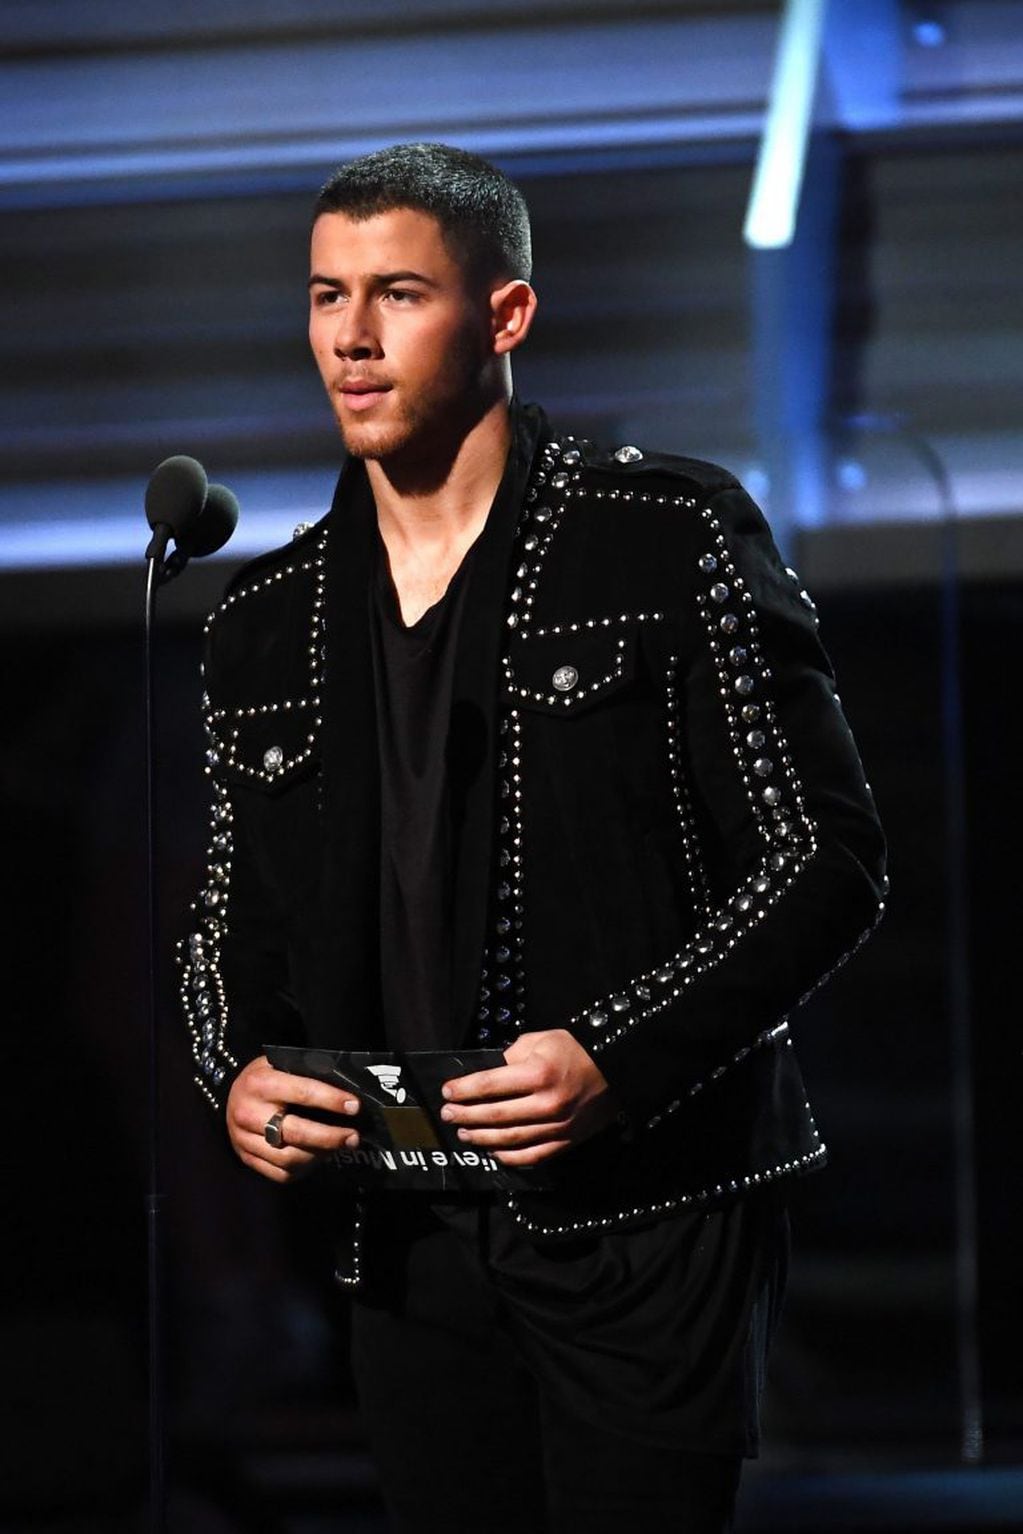 LOS ANGELES, CA - FEBRUARY 12: Recording artist Nick Jonas speaks onstage during The 59th GRAMMY Awards at STAPLES Center on February 12, 2017 in Los Angeles, California.   Kevork Djansezian/Getty Images/AFP
== FOR NEWSPAPERS, INTERNET, TELCOS & TELEVISIO